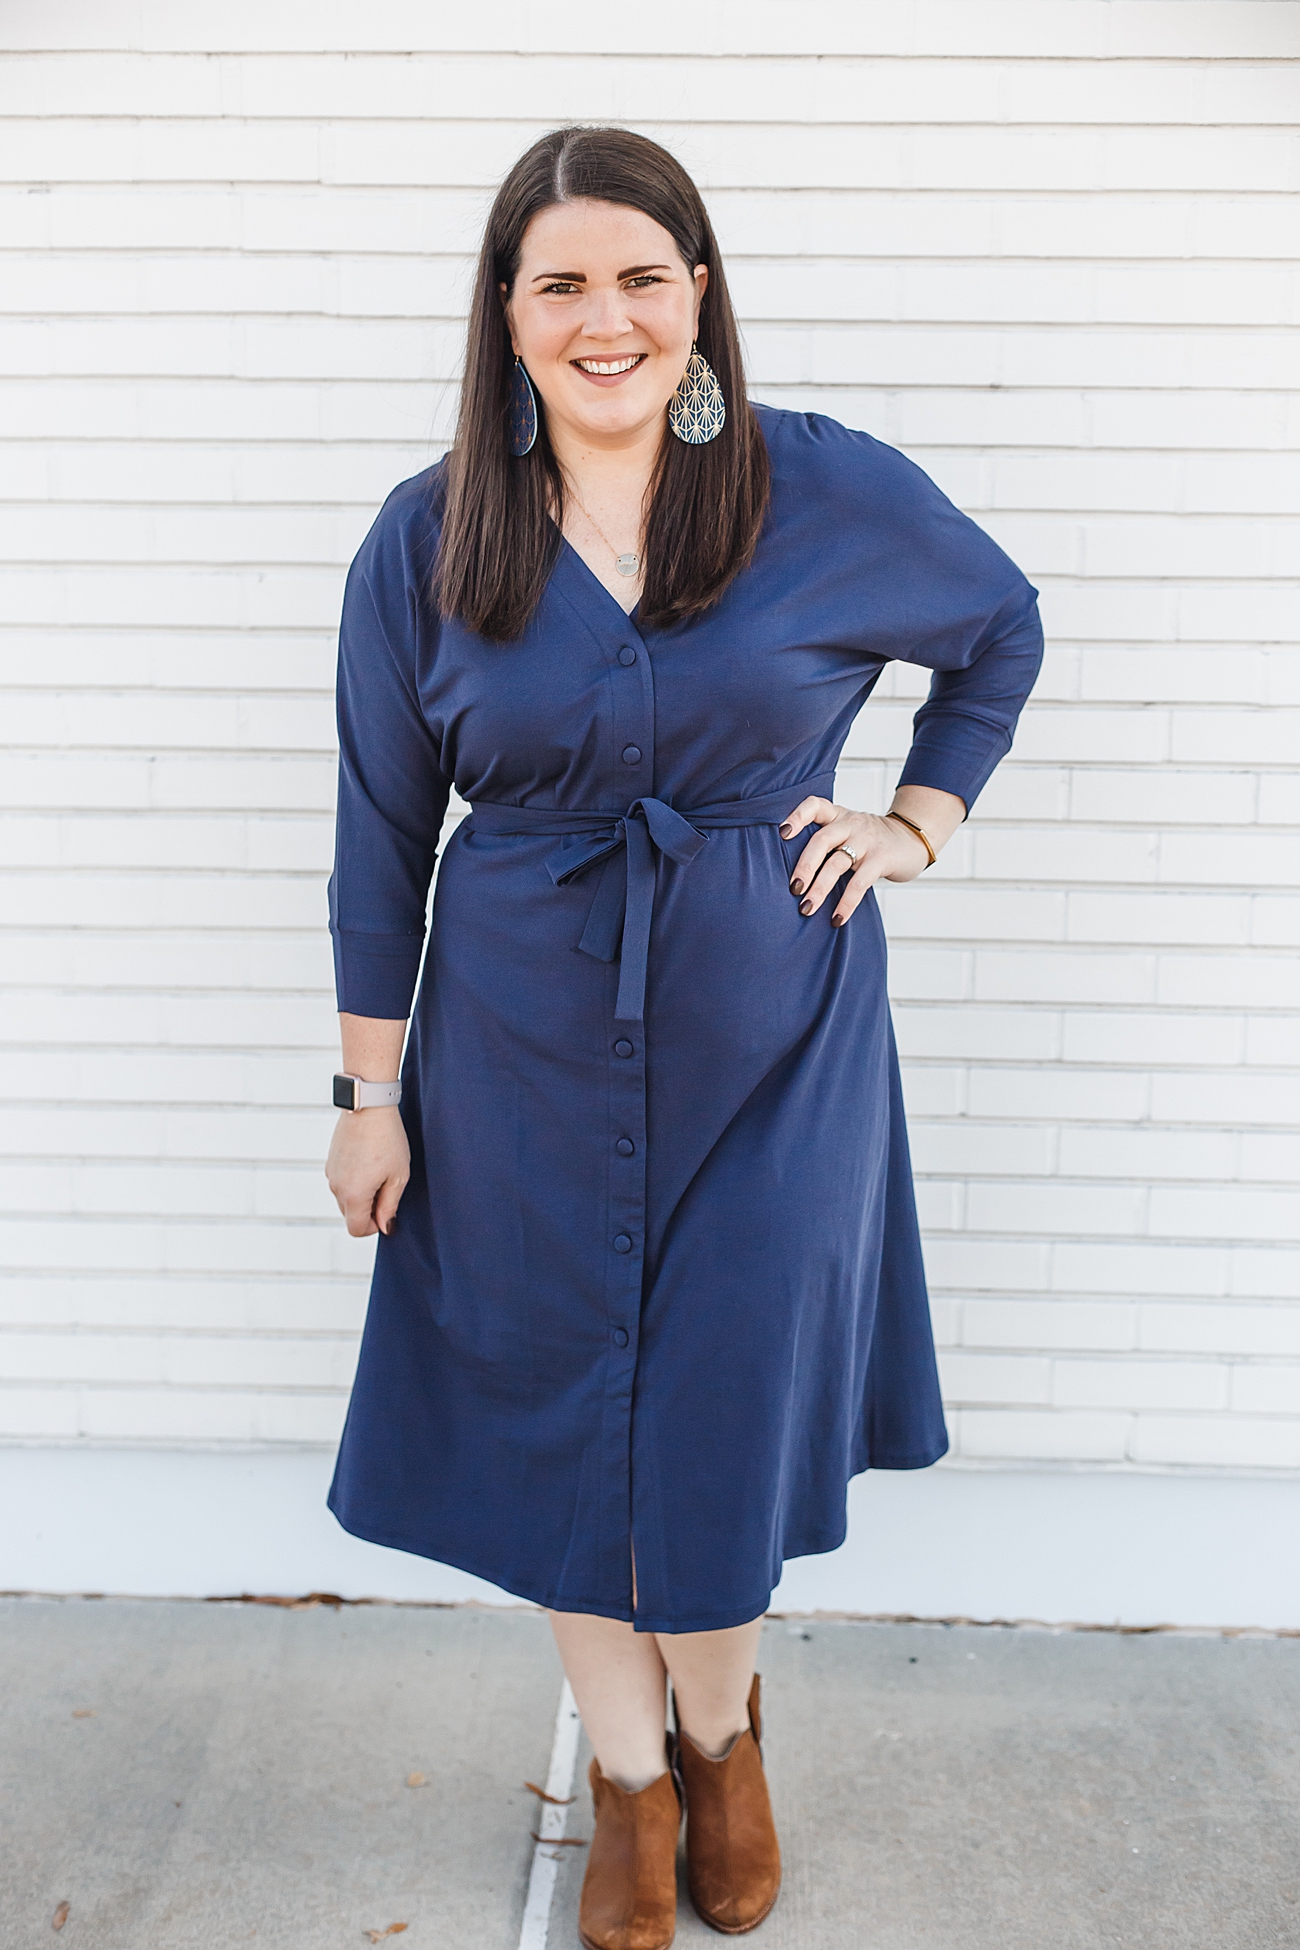 The Elegantees "Molly" Dress is Here! | Beautiful, versatile, ethically made dress (28)